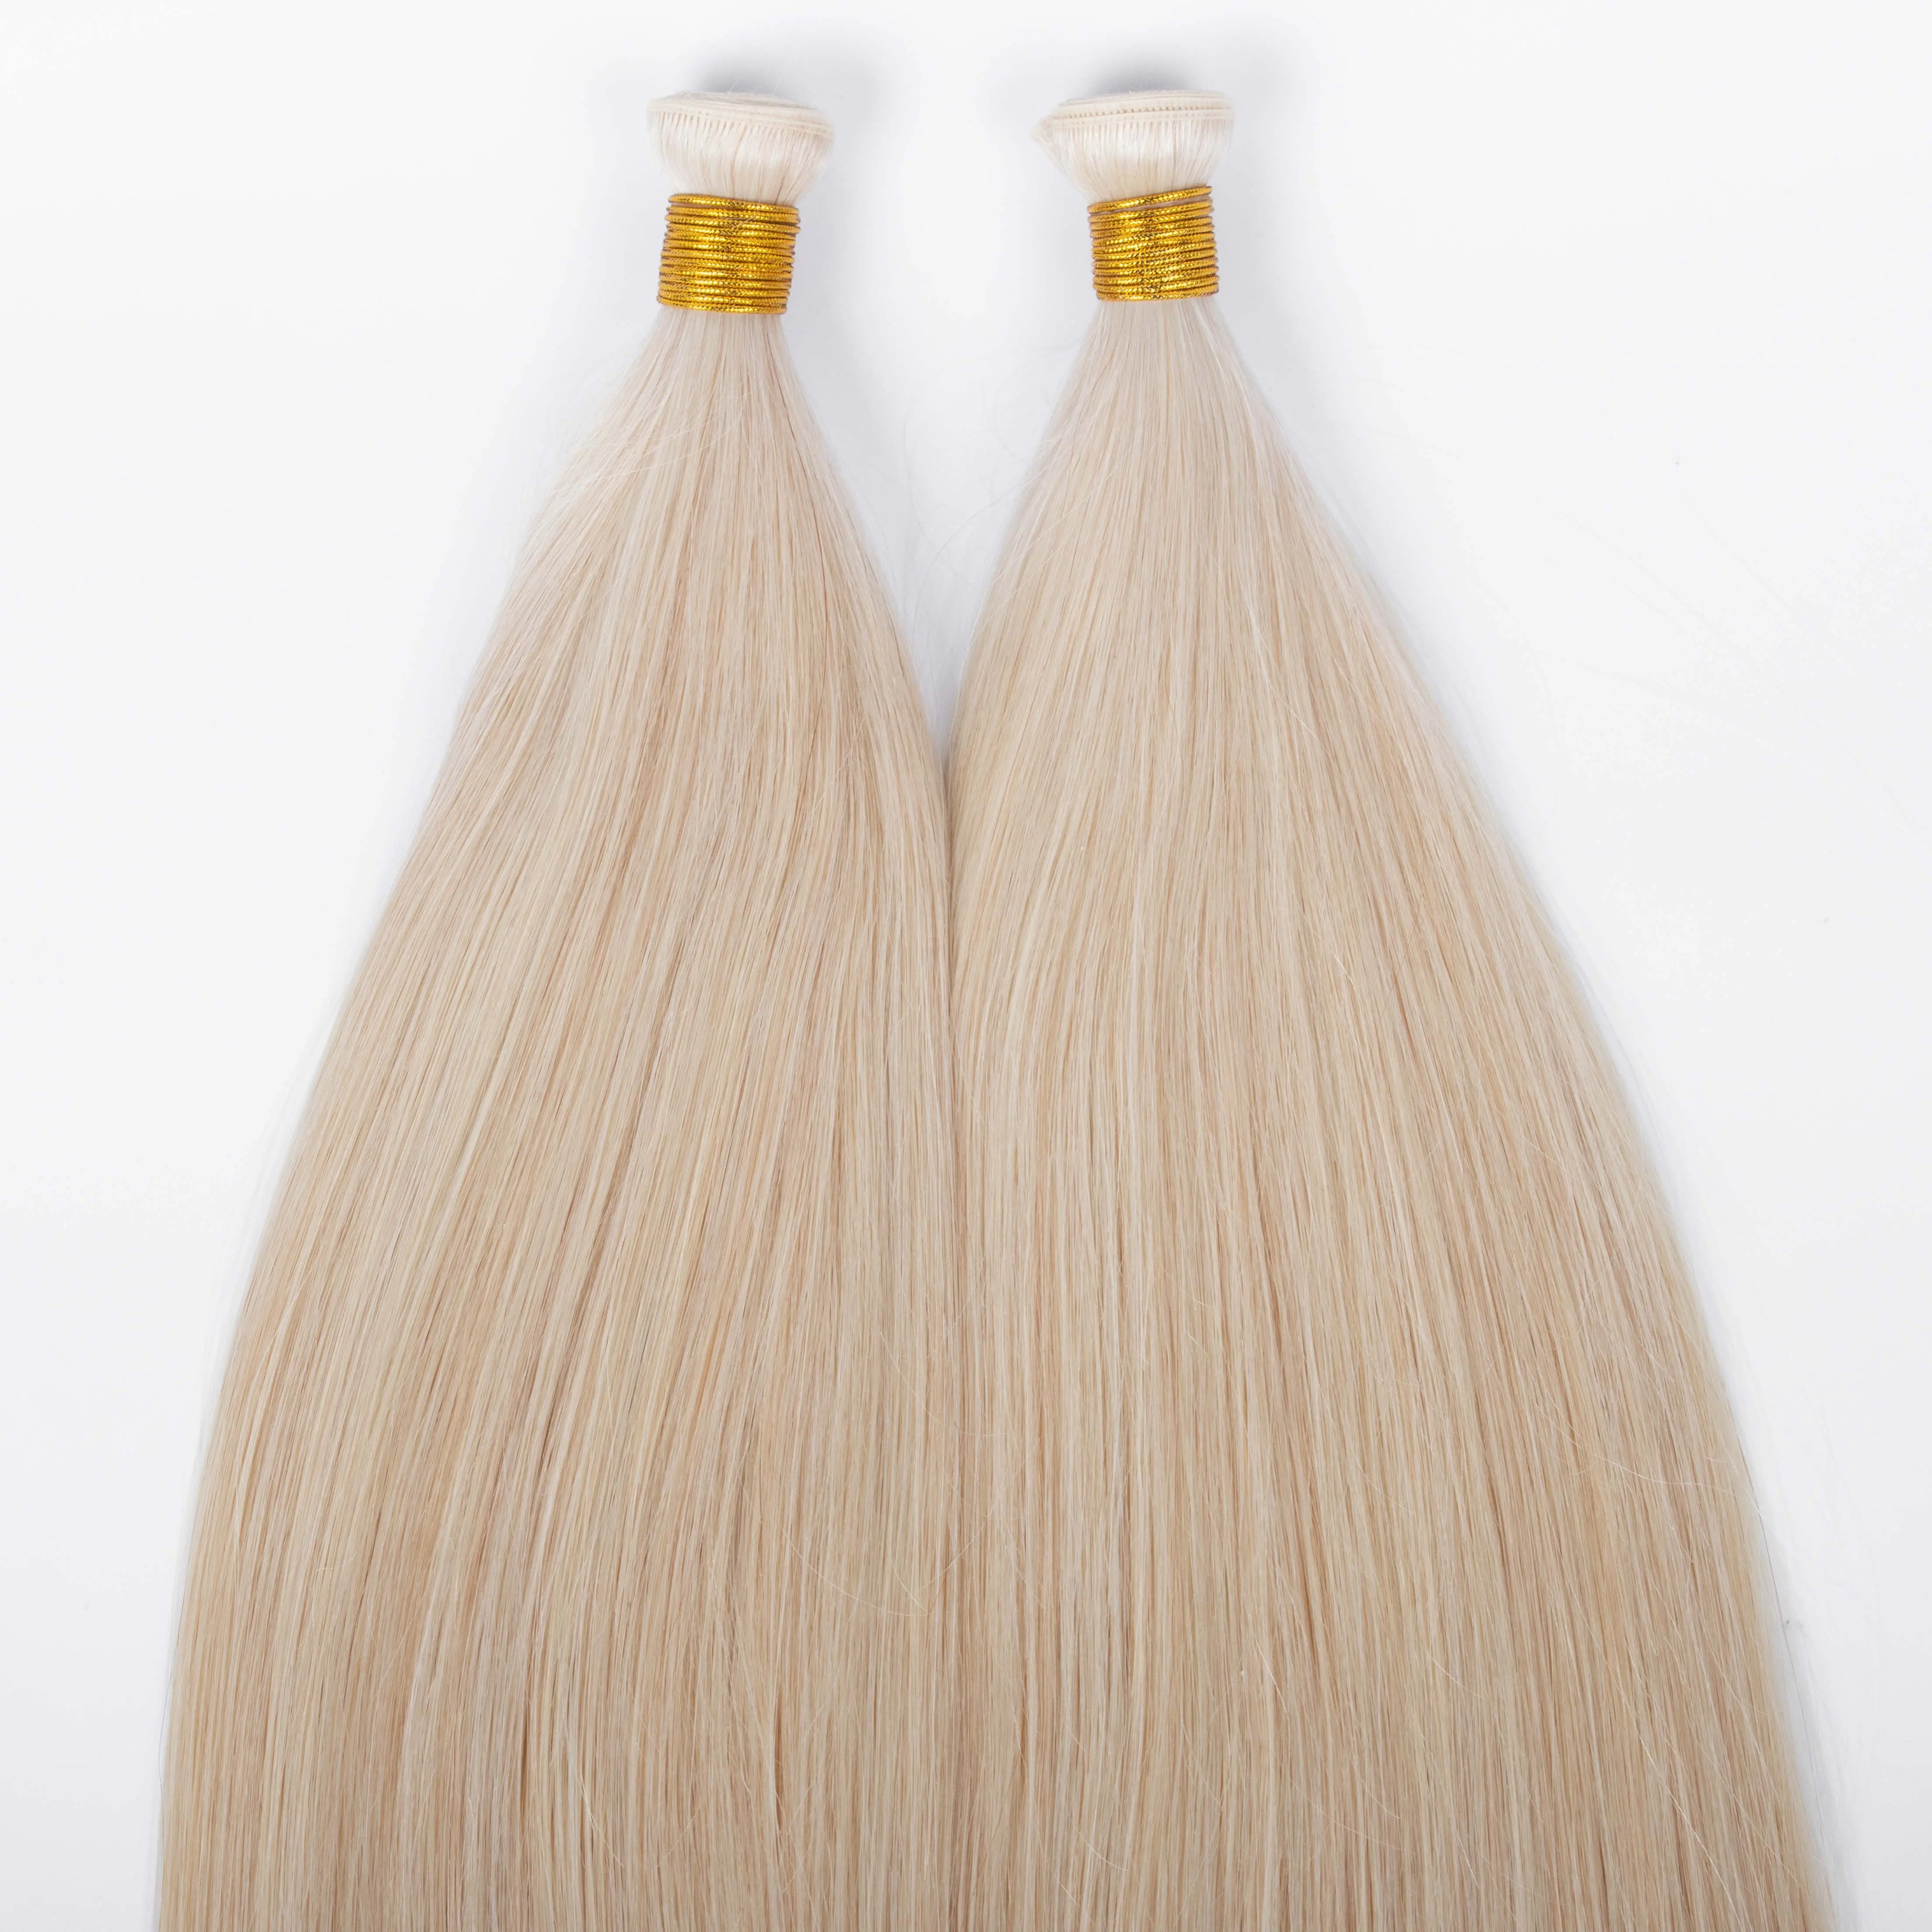 Hot Sales Cheap Price Best Quality Russian 100% Human Hair Genius Weft Cuticle Aligned Remy Light Color Hair Extensions